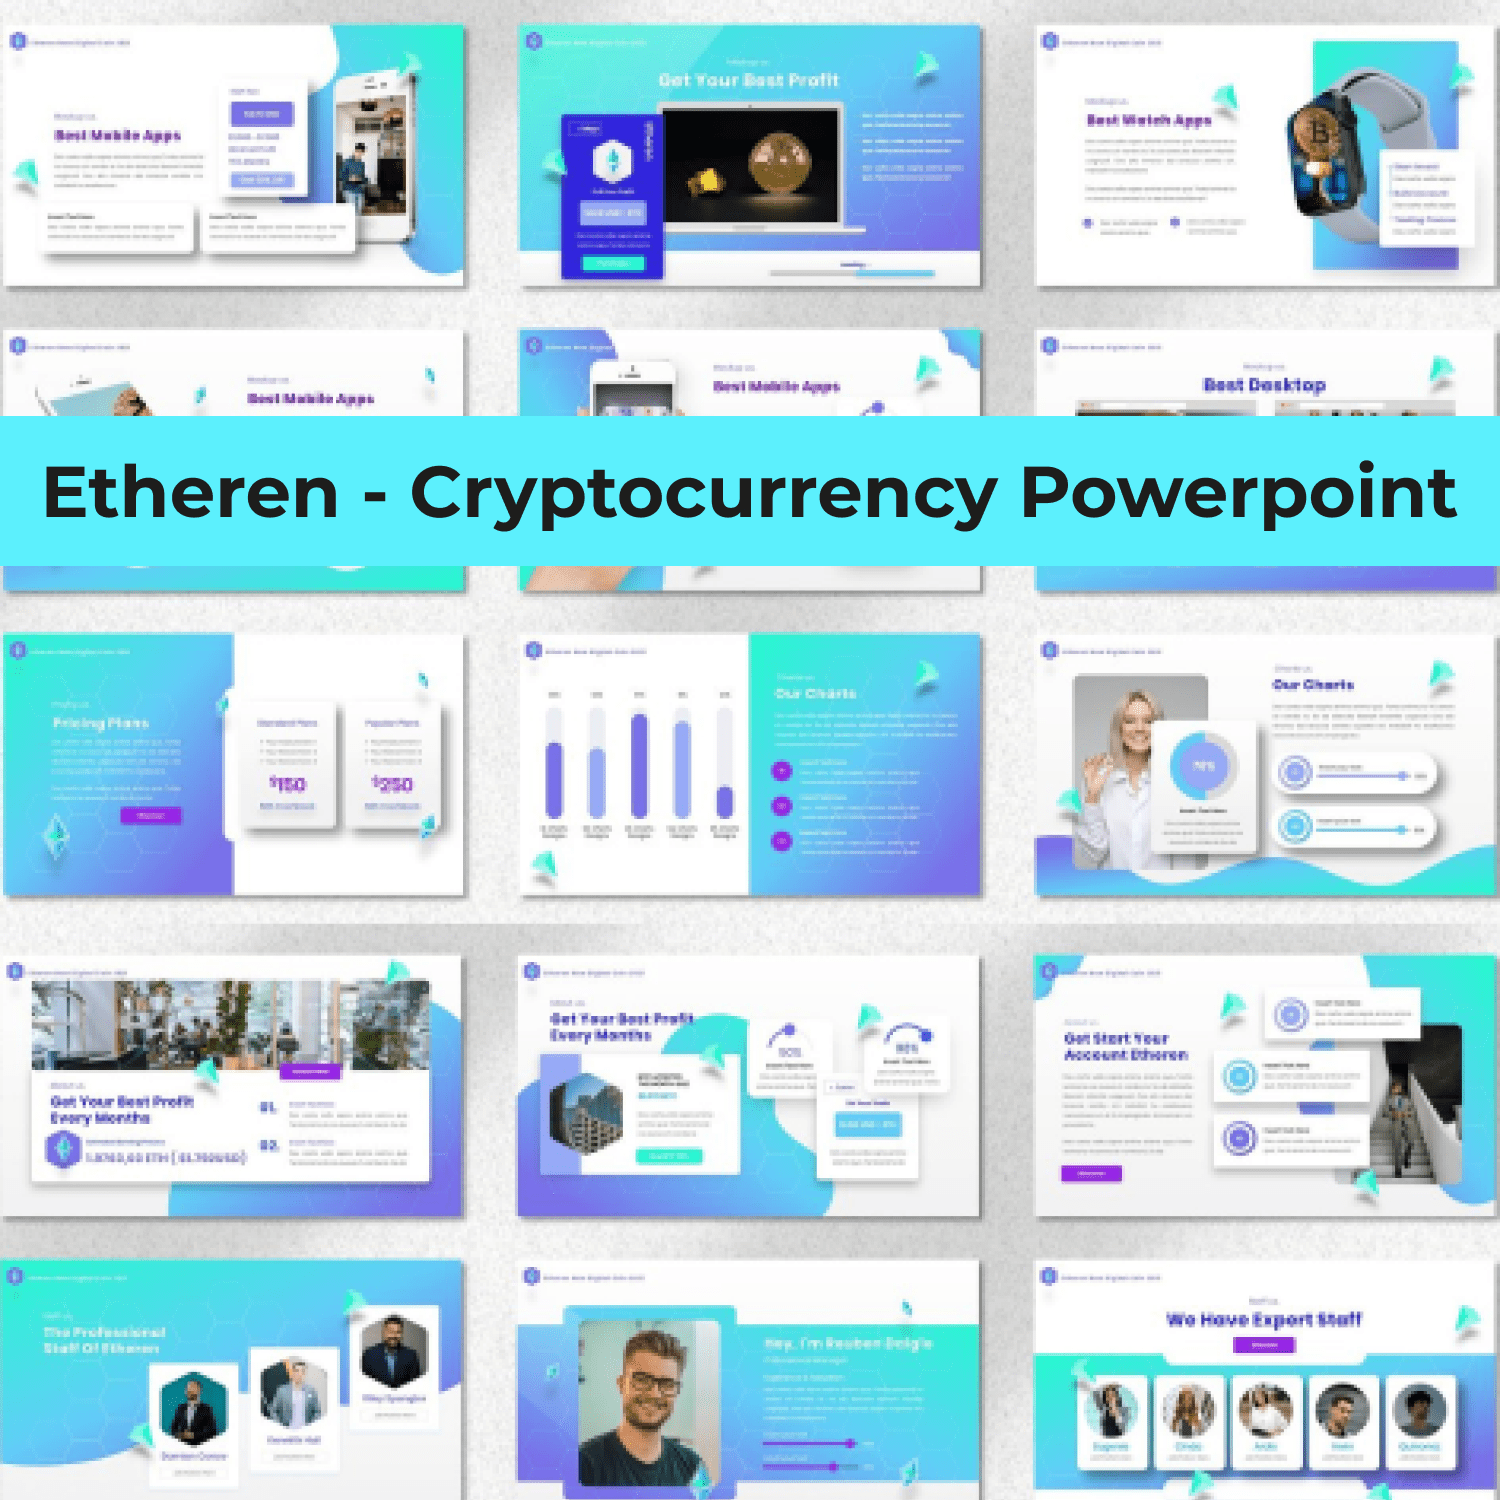 Etheren - Cryptocurrency Powerpoint cover image.